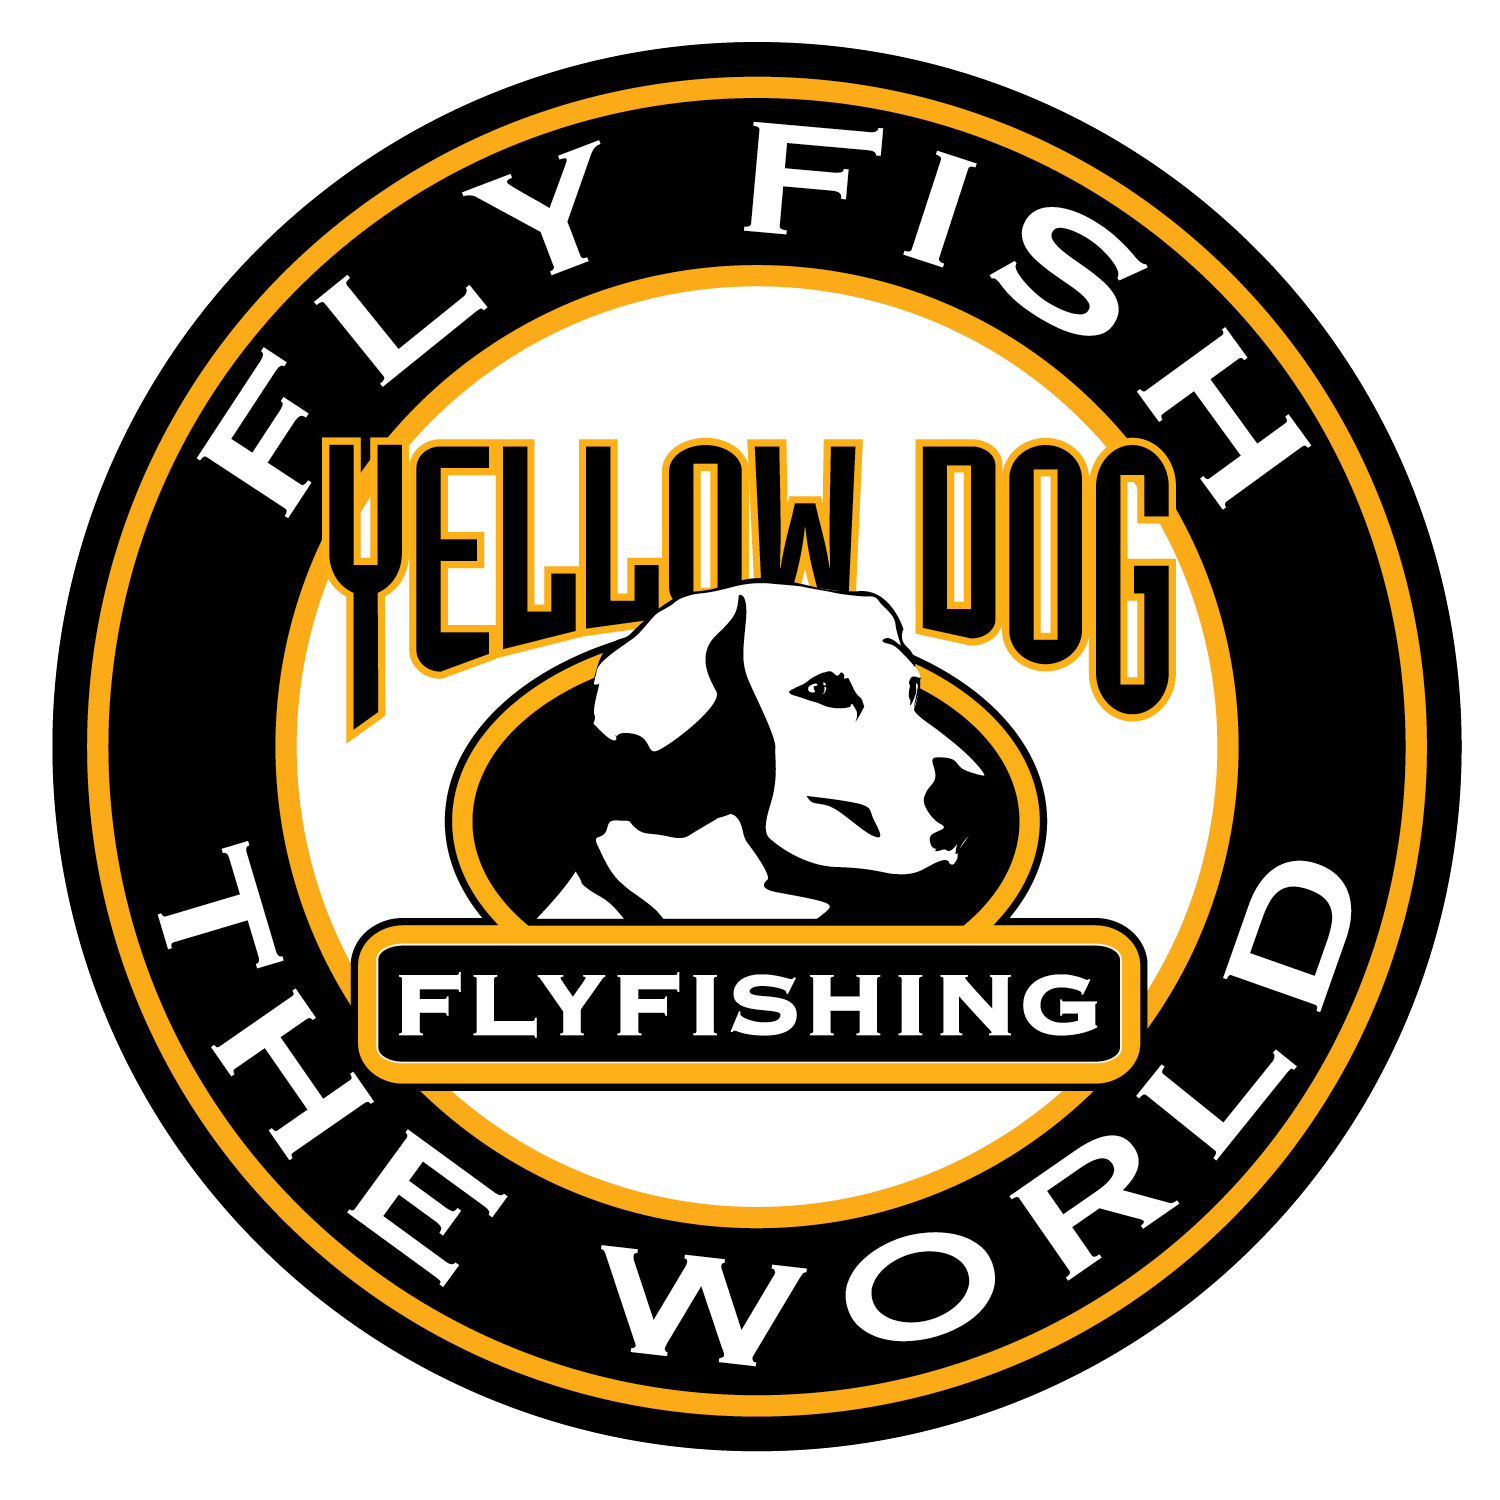 Yellow Dog Flyfishing  We book and provide gear for guided